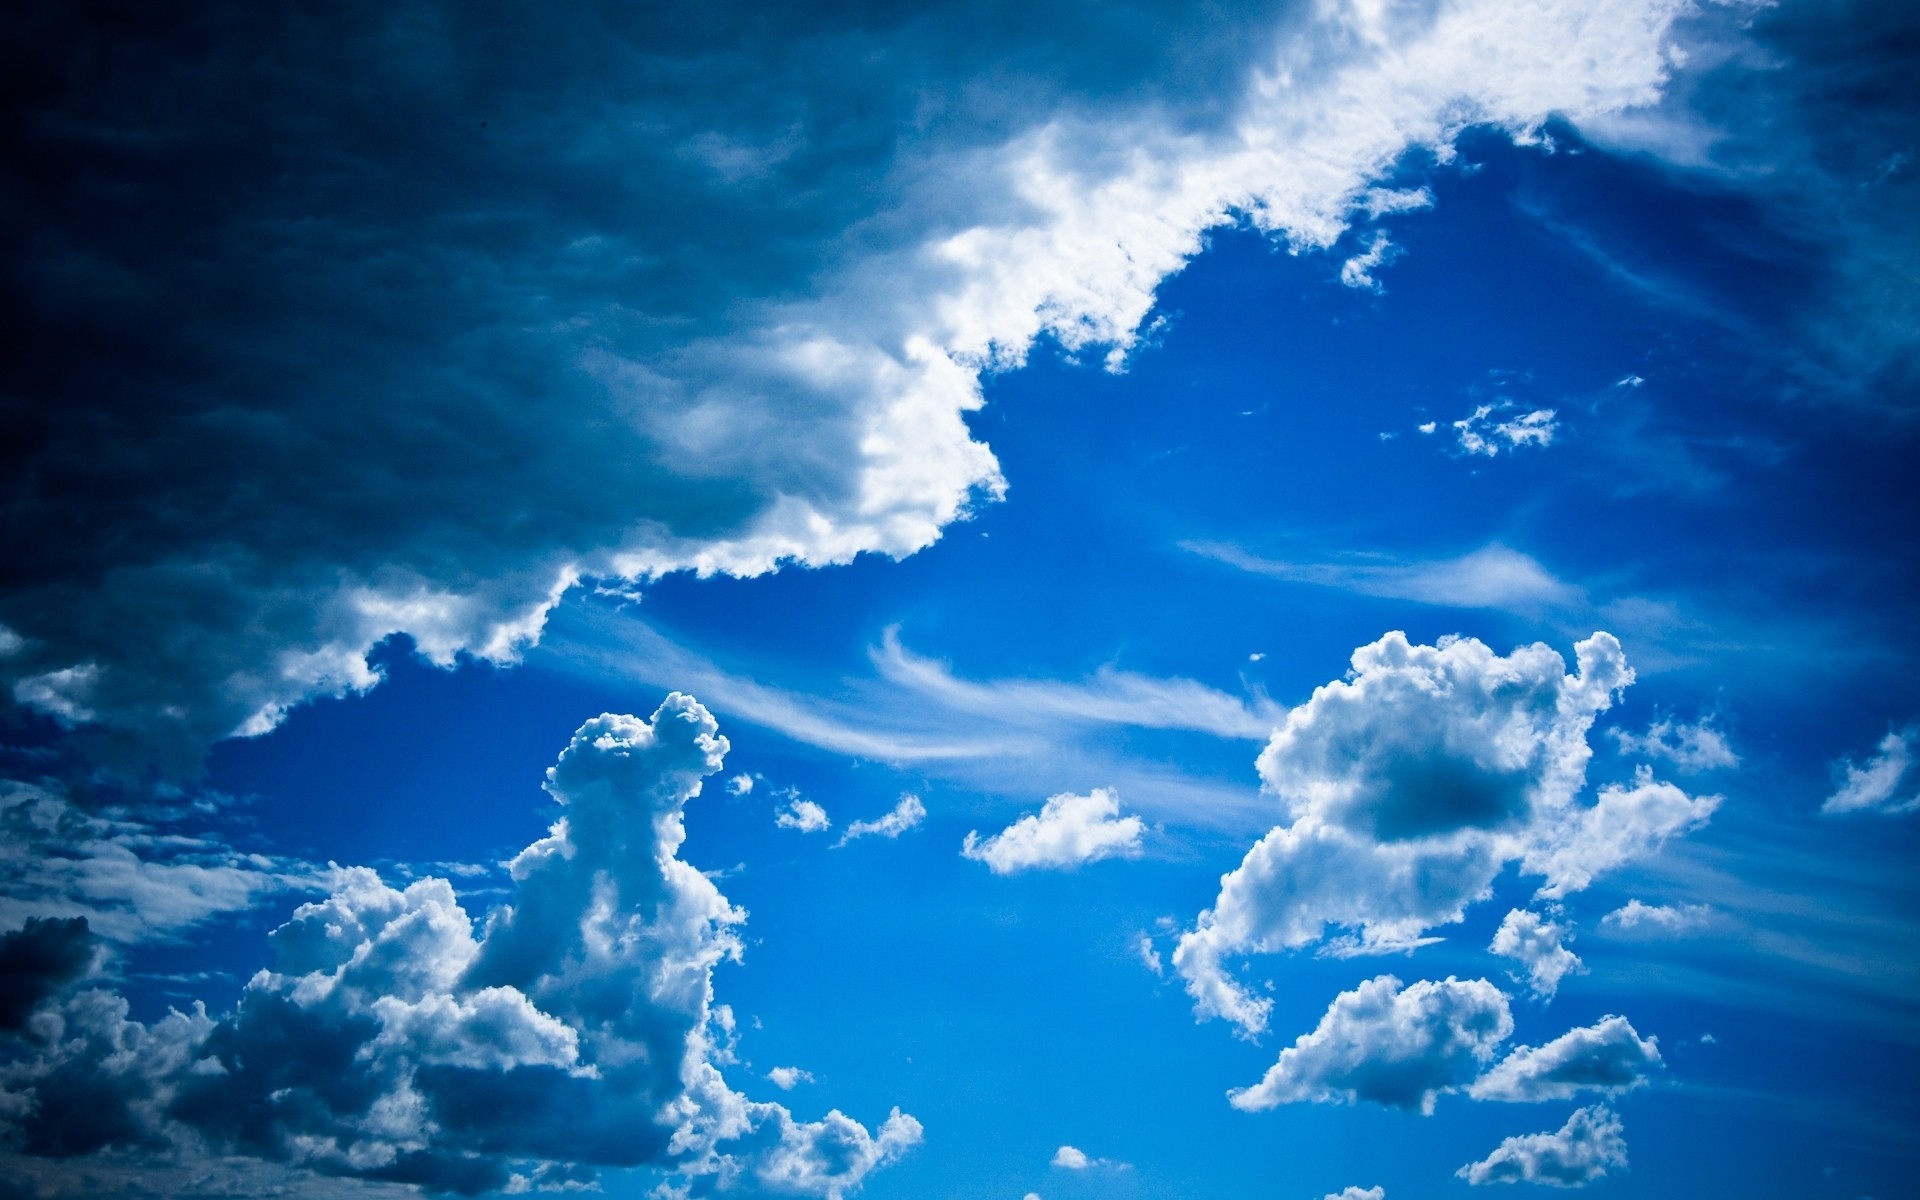 Clouds in Blue Sky HD Wallpaper | Background Image | 1920x1200 | ID